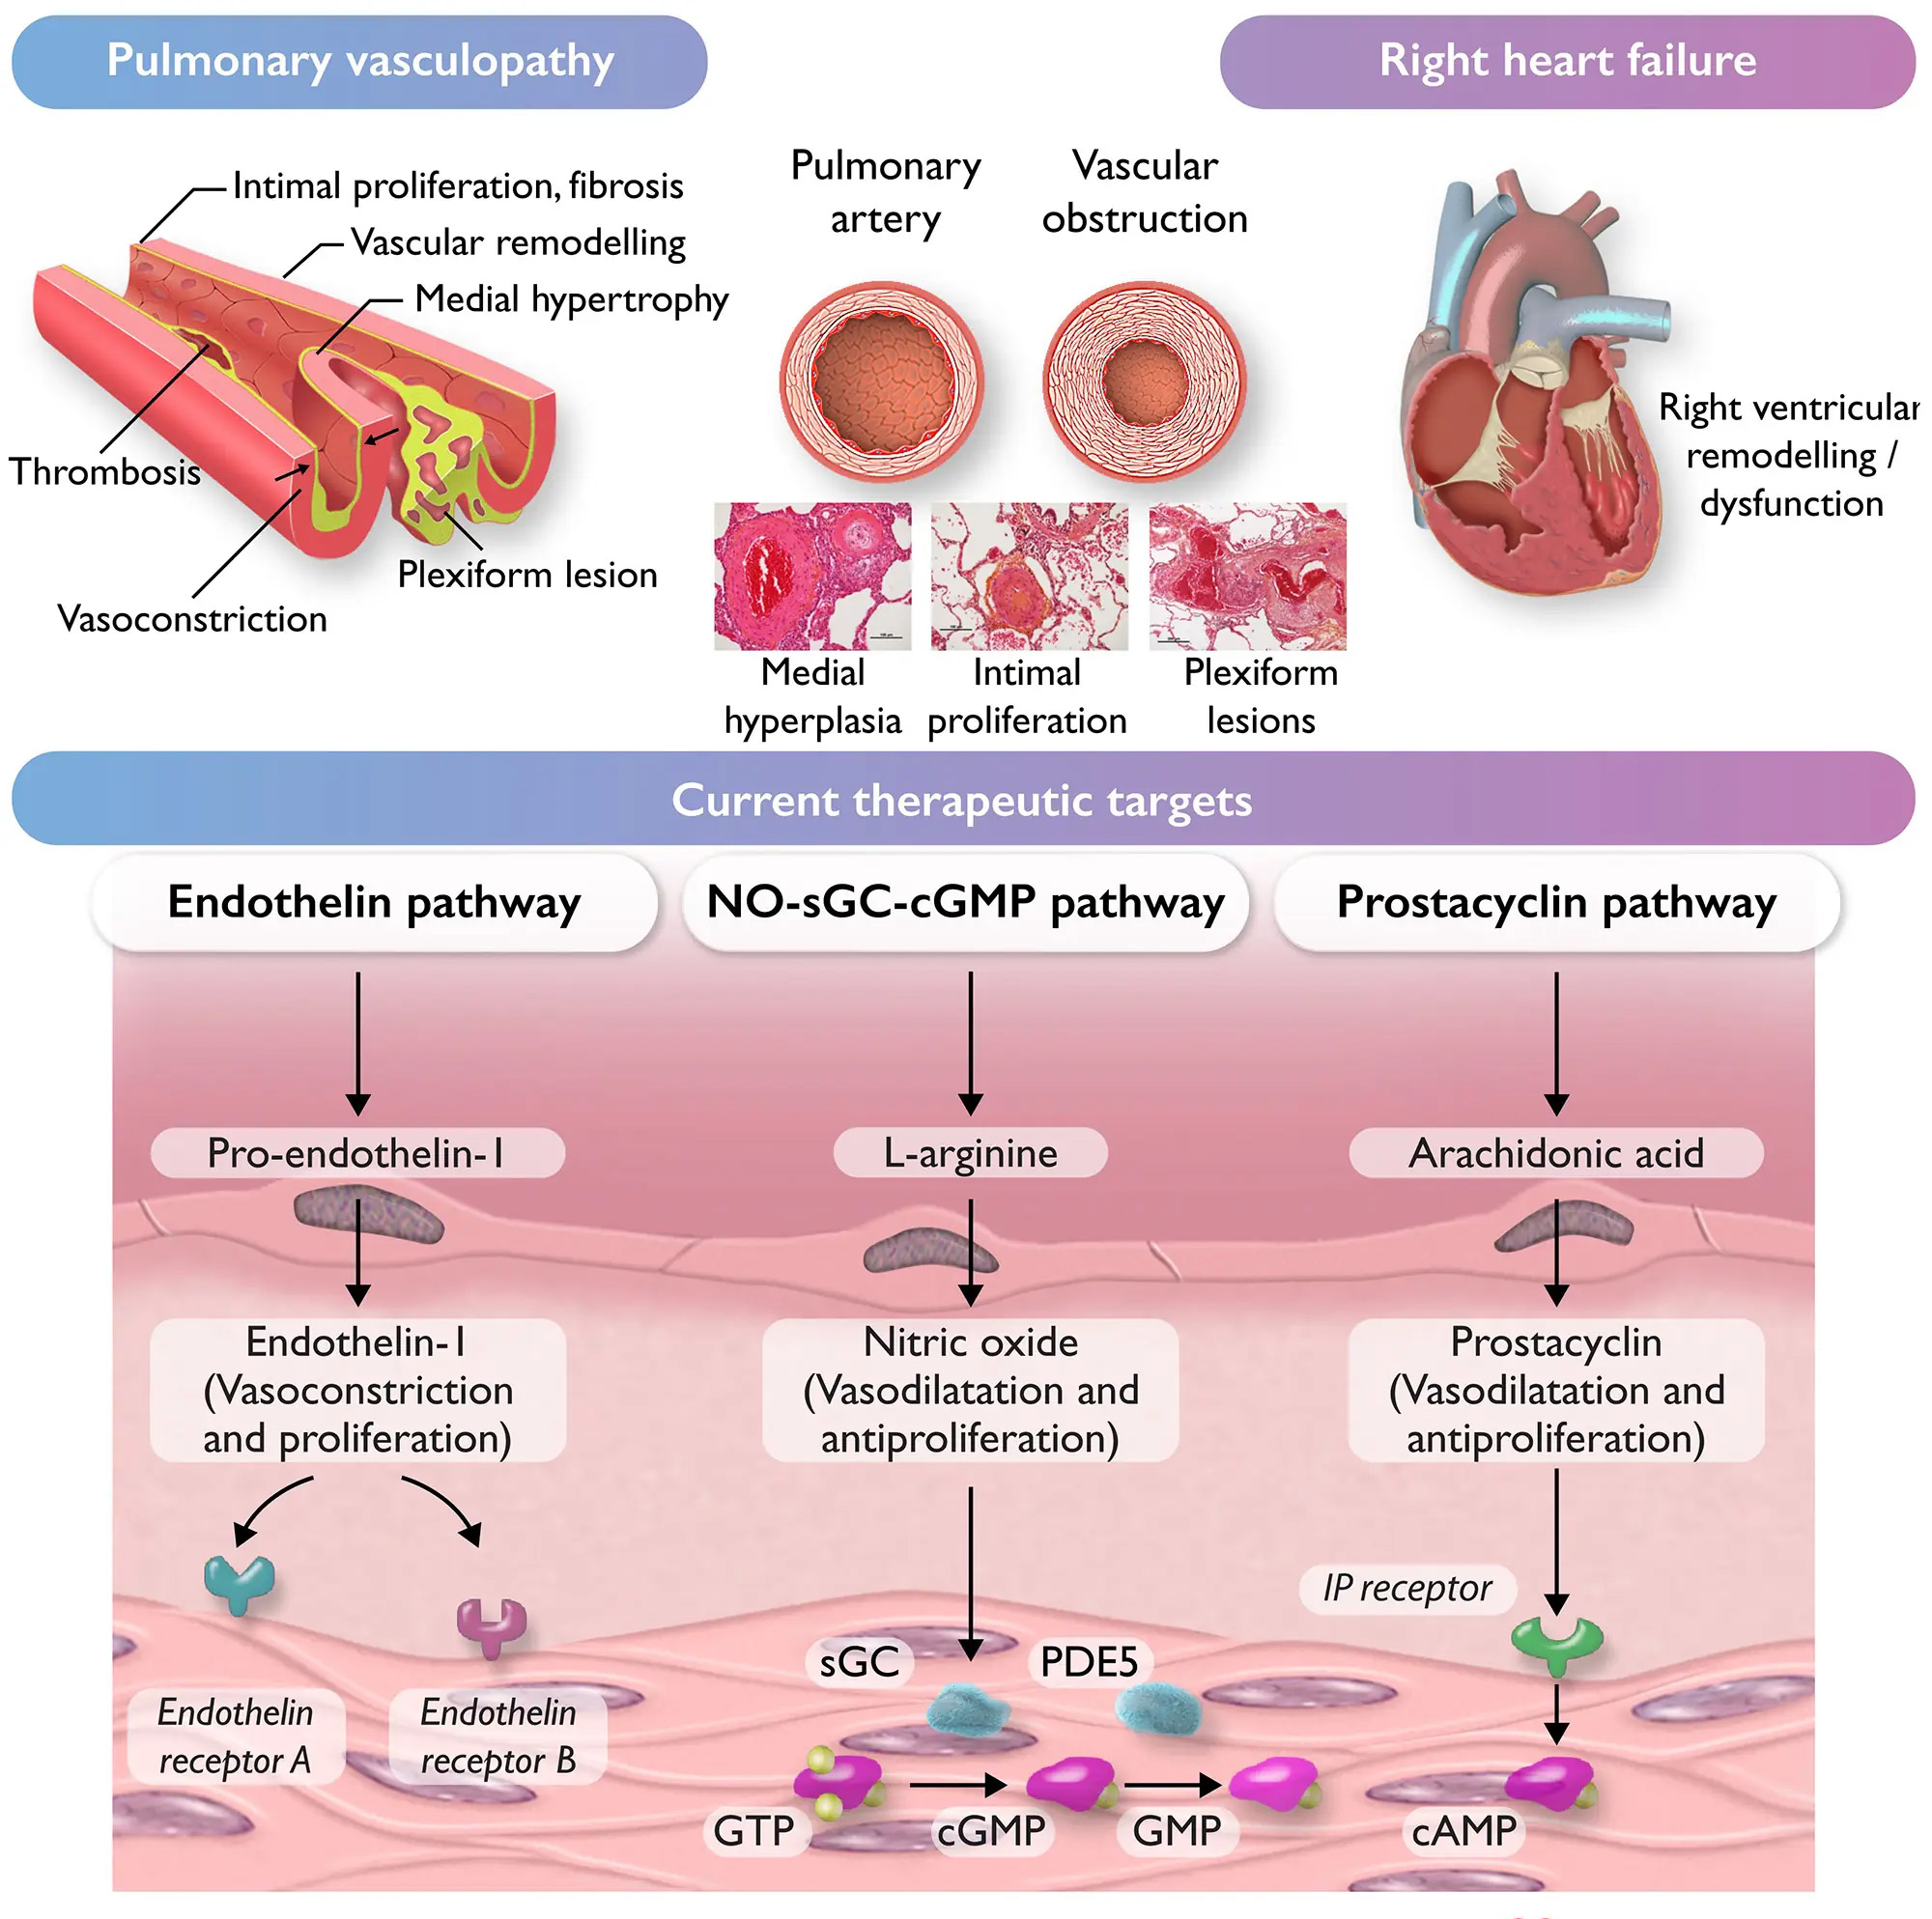 Diagram showing pulmonary hypertension effects and therapeutic targets